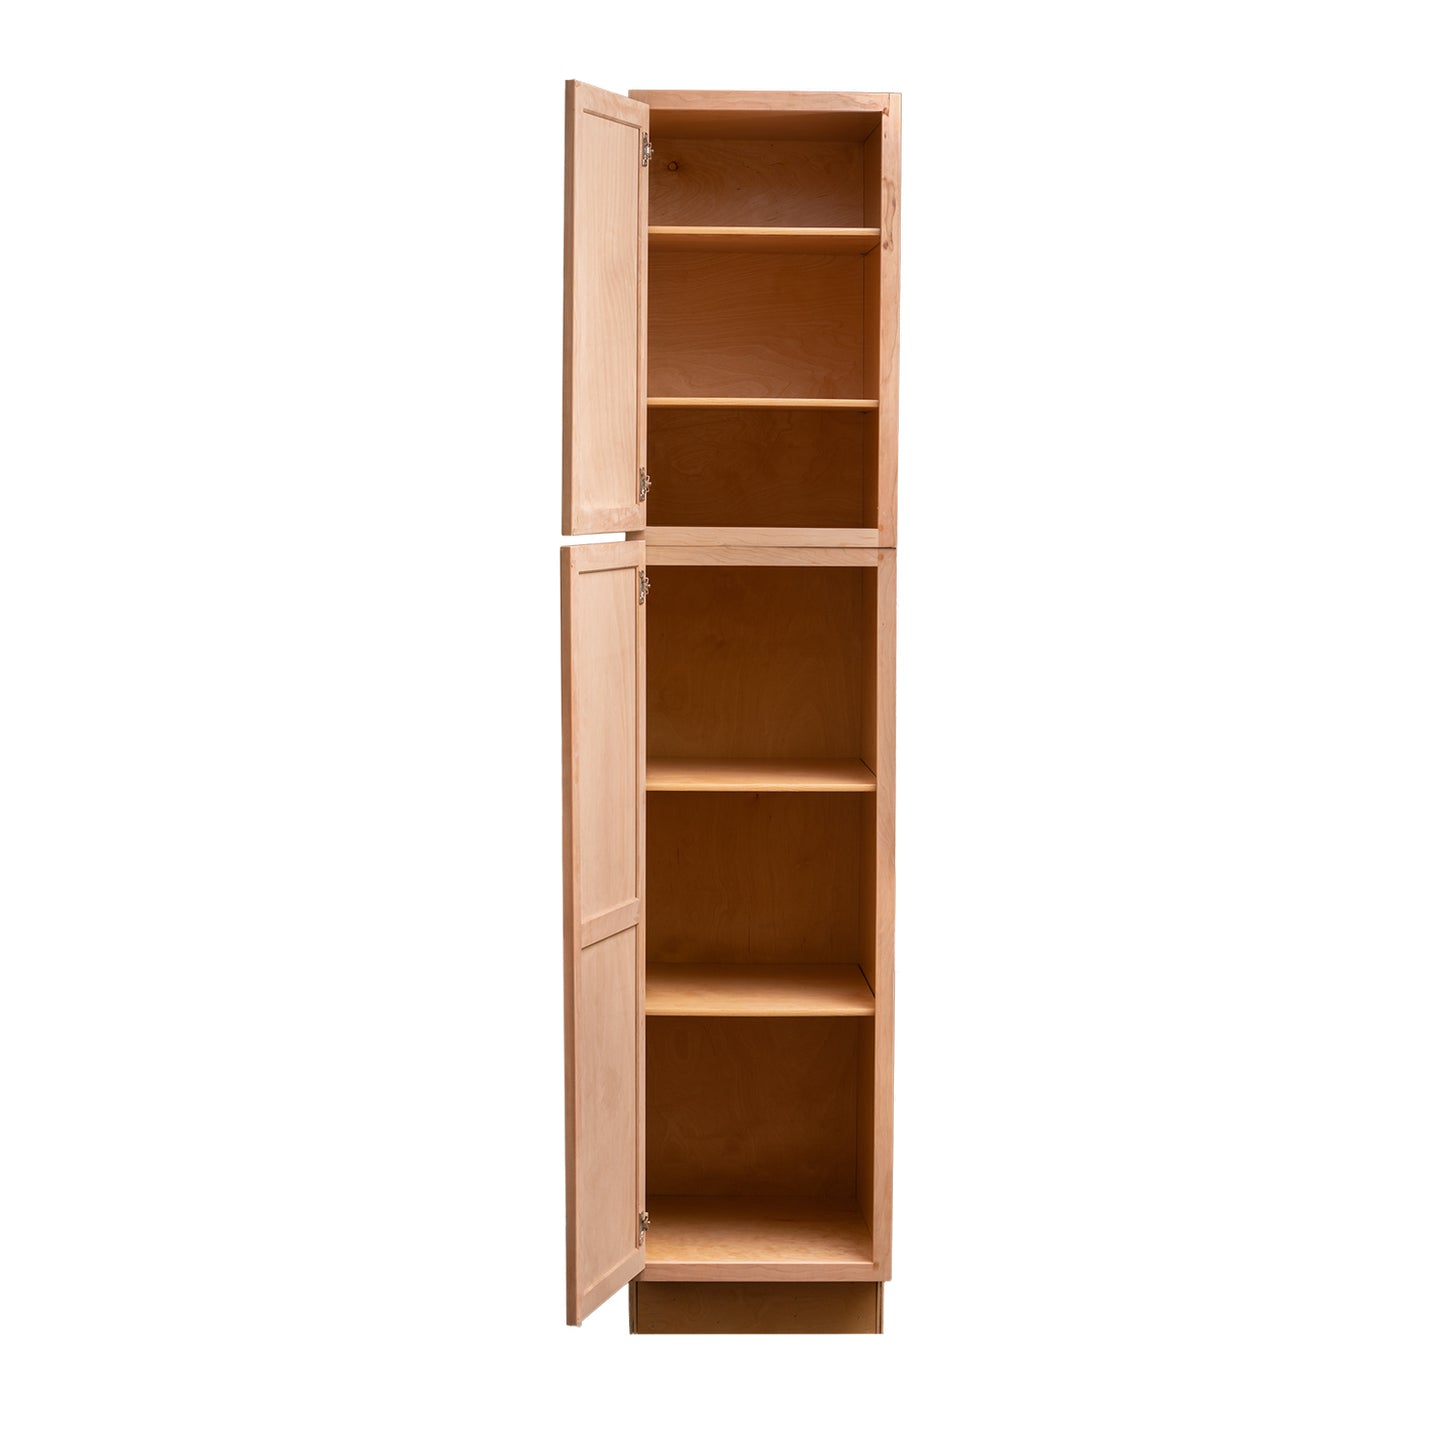 Quicklock RTA (Ready-to-Assemble) Raw Cherry Pantry Cabinet- 18" Wide